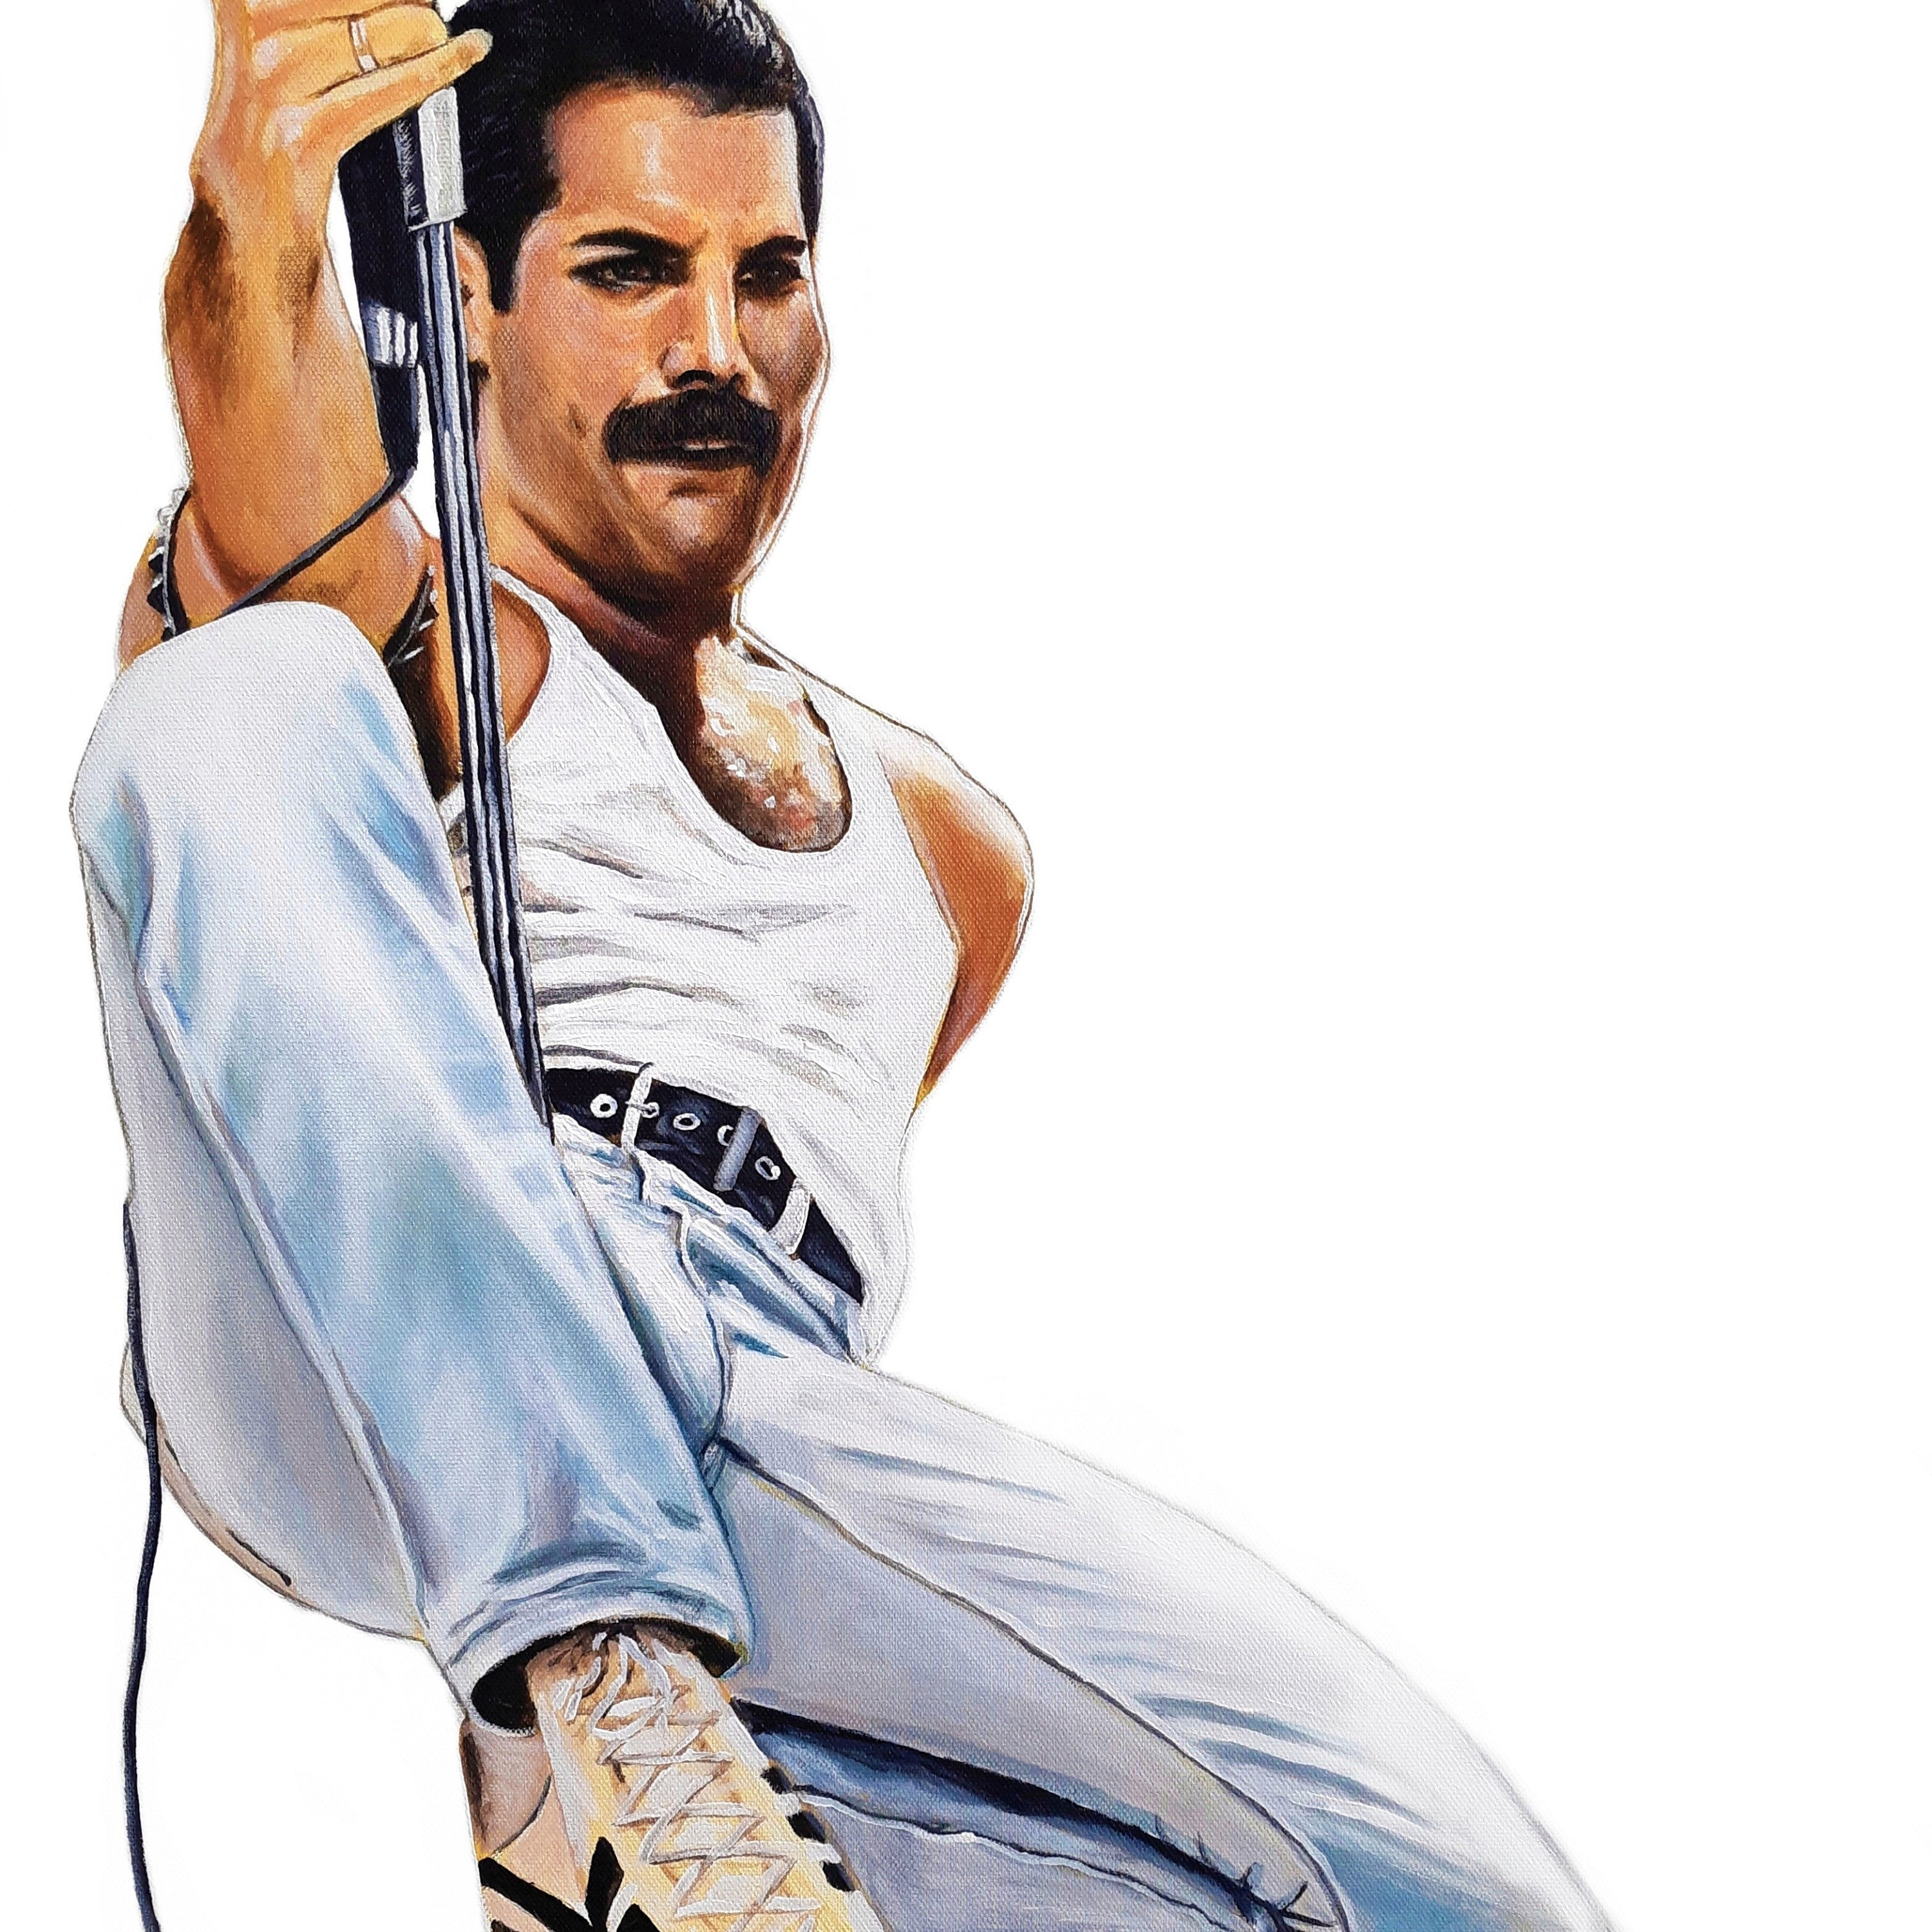 Freddie mercury iconic pose in colorful art Vector Image